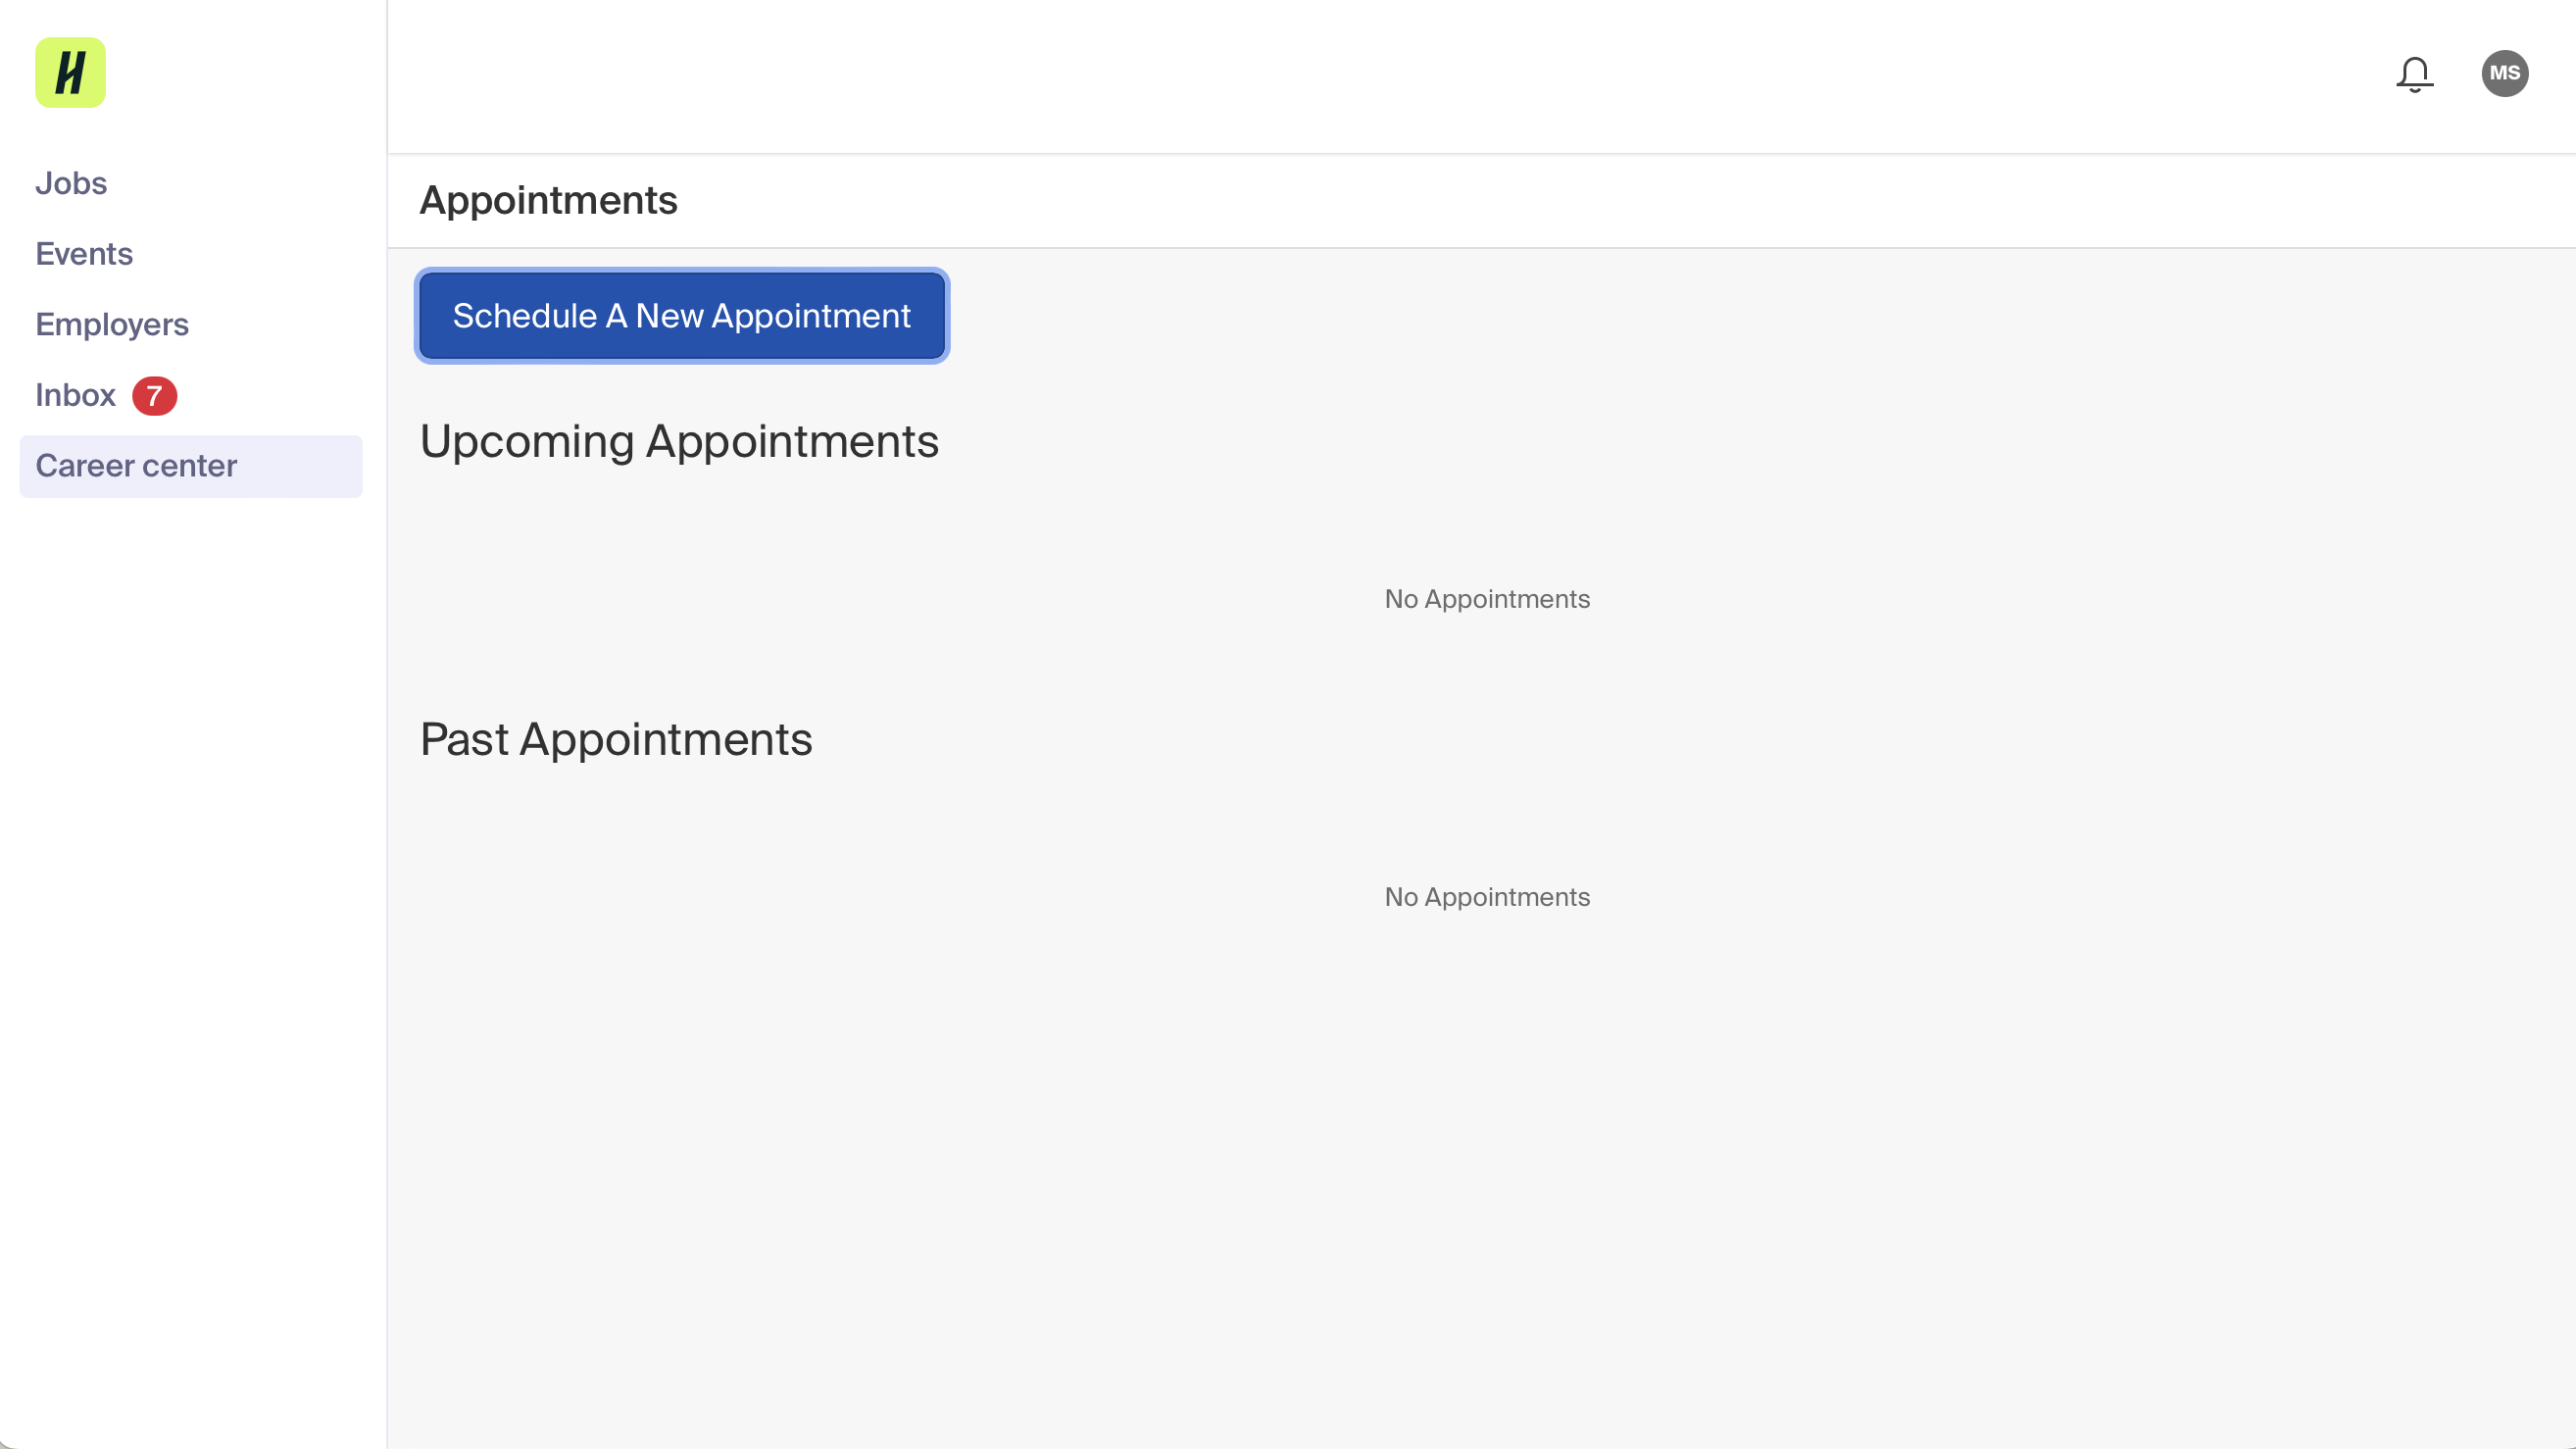 This is the Appointments page. Select the blue button titled 'Schedule A New Appointment', which is located in the main content area.